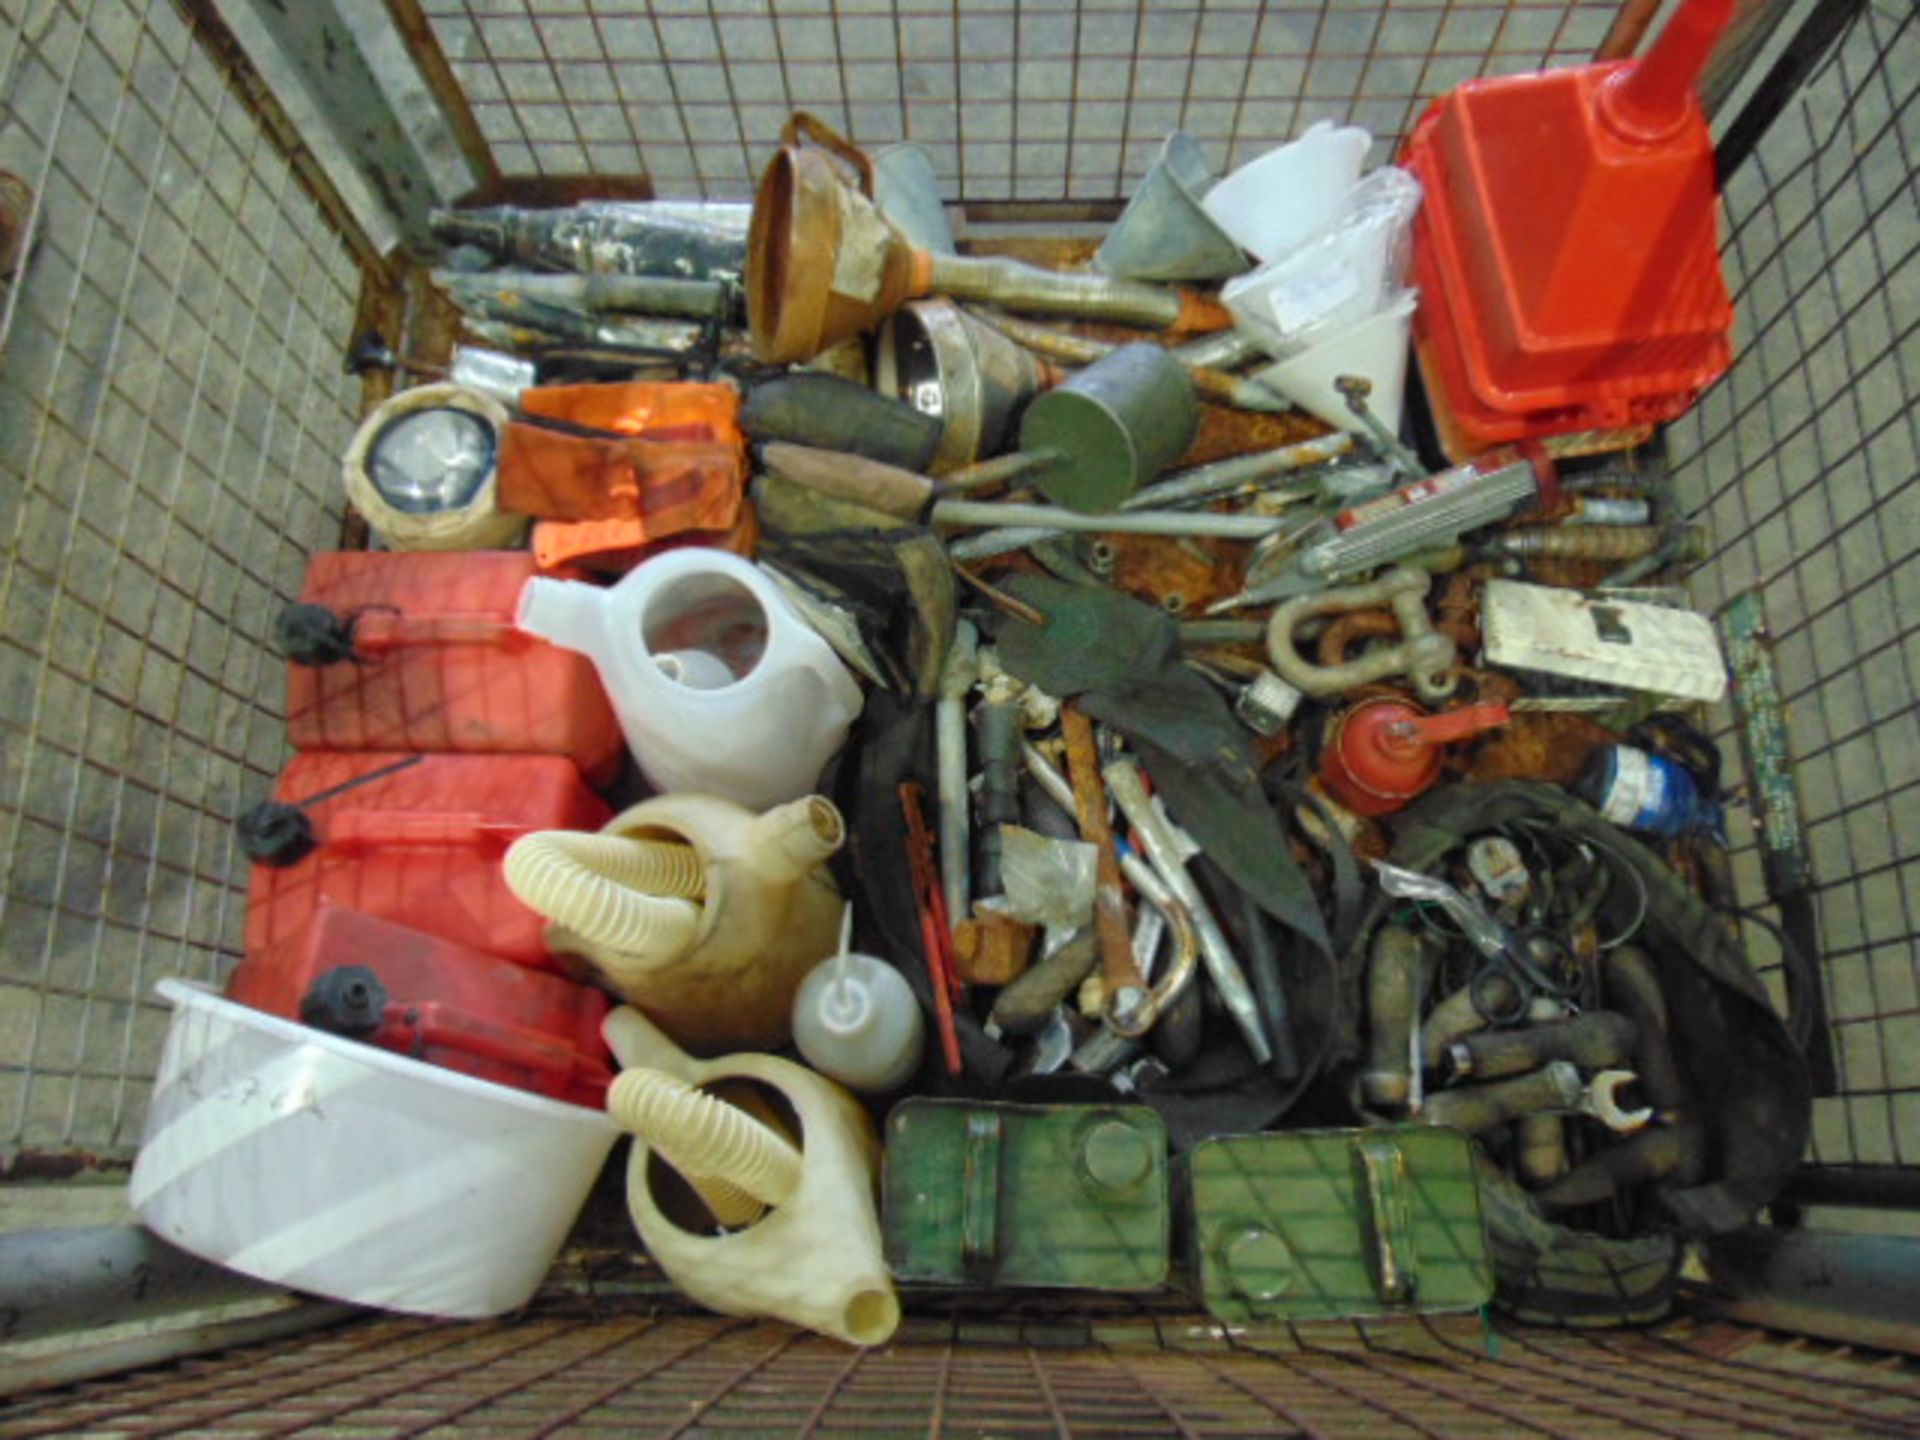 Stillage of Workshop Tools and Accessories